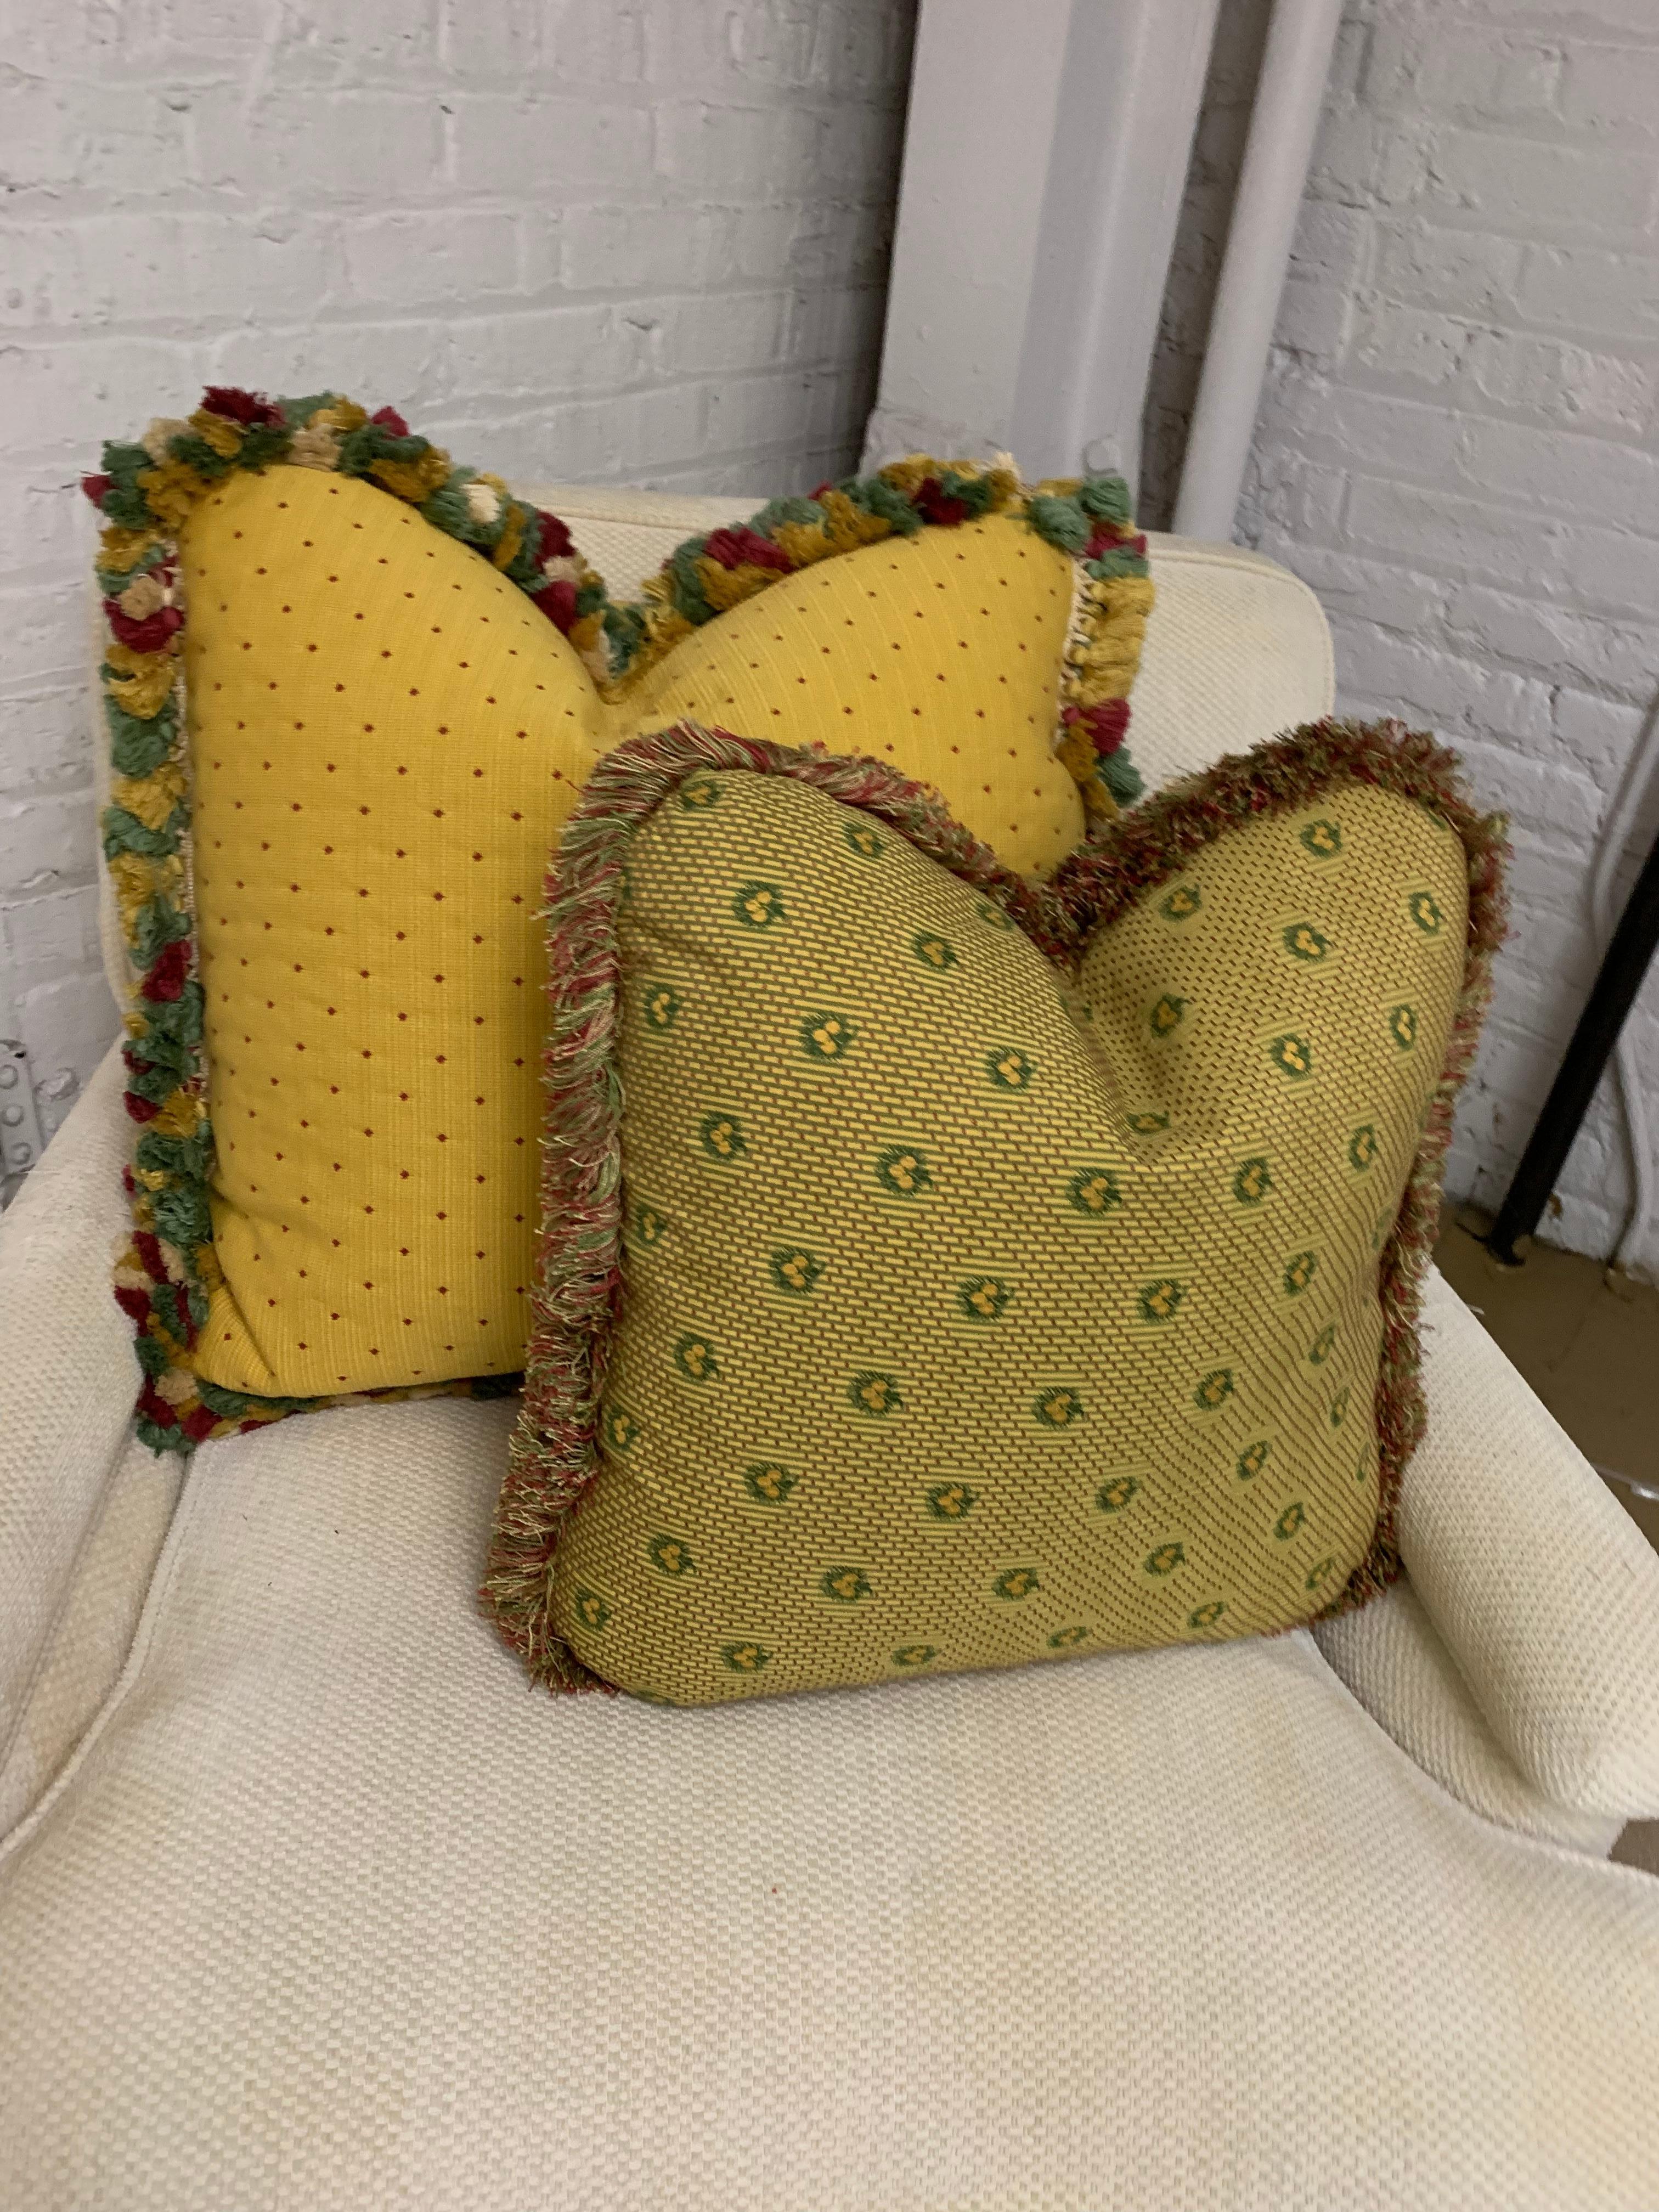 Antique handmade pillows gold and green / a pair
Handmade and hand stiched, these antique pillows are one of a kind -
gold with slight pin dot pattern, and incredible multi-tassel trim!
Dimensions: 18